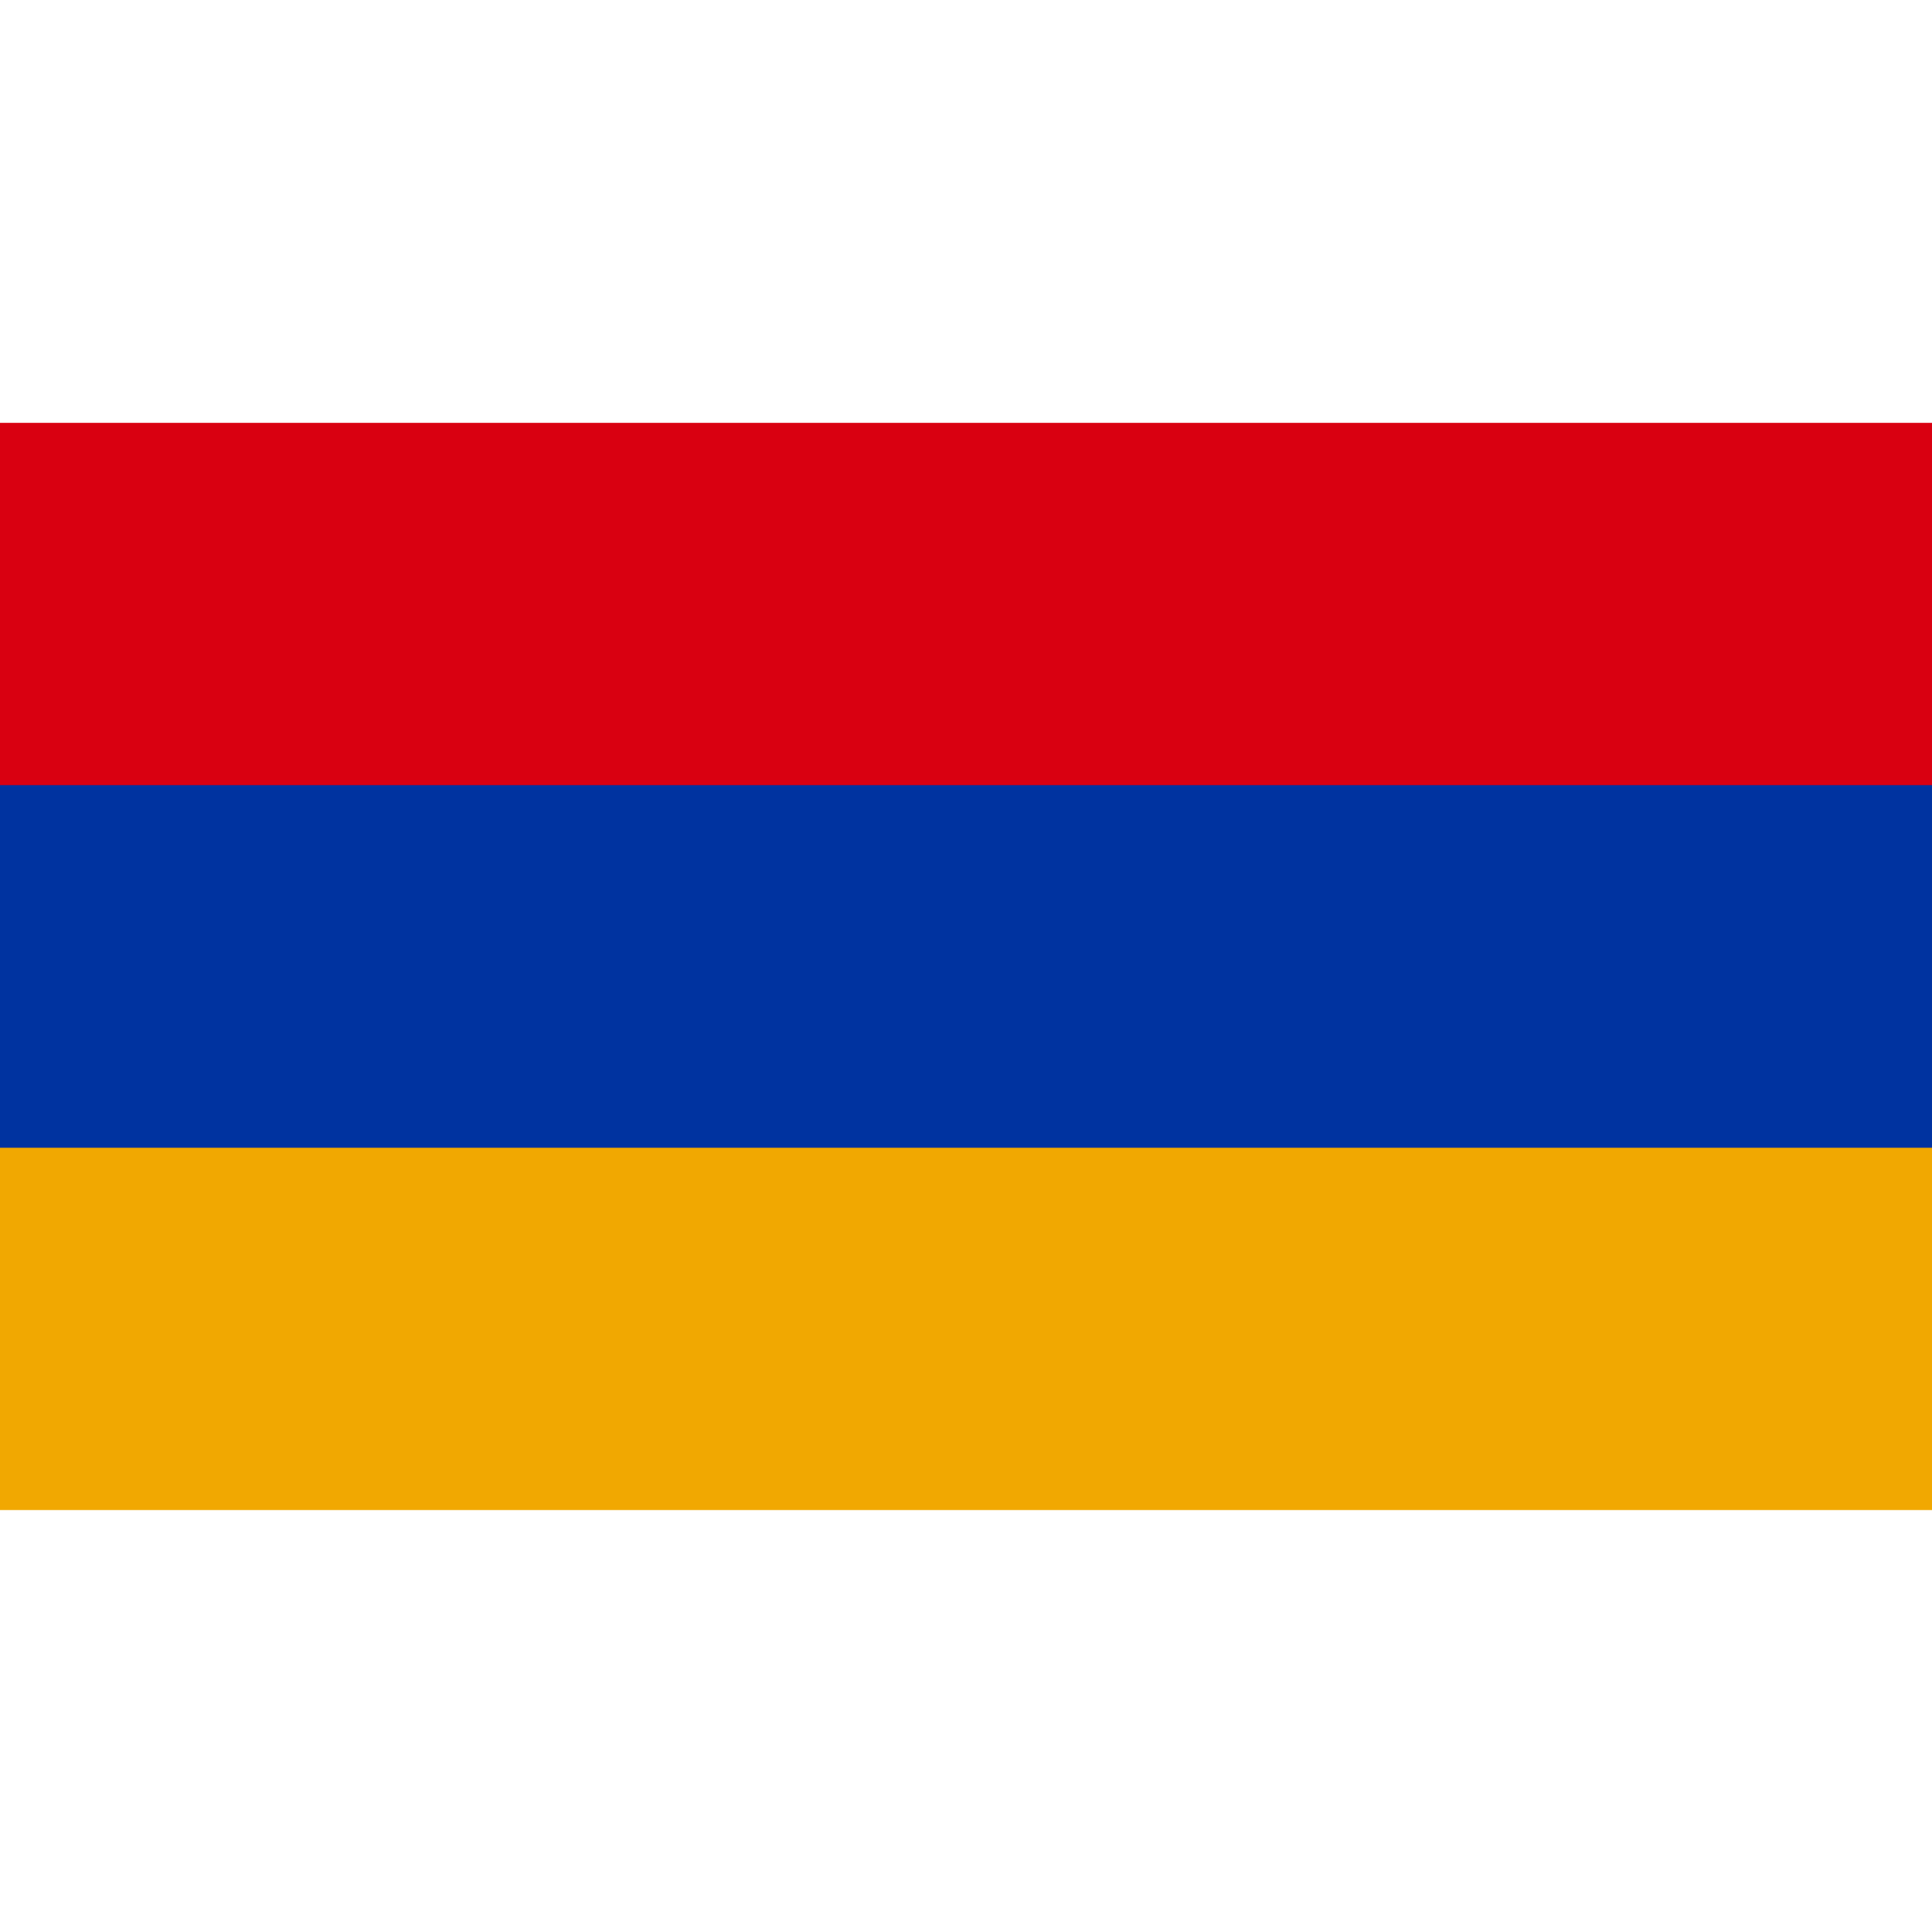 The flag of Armenia is a tricolour with 3 equal horizontal bands in red, blue and orange.